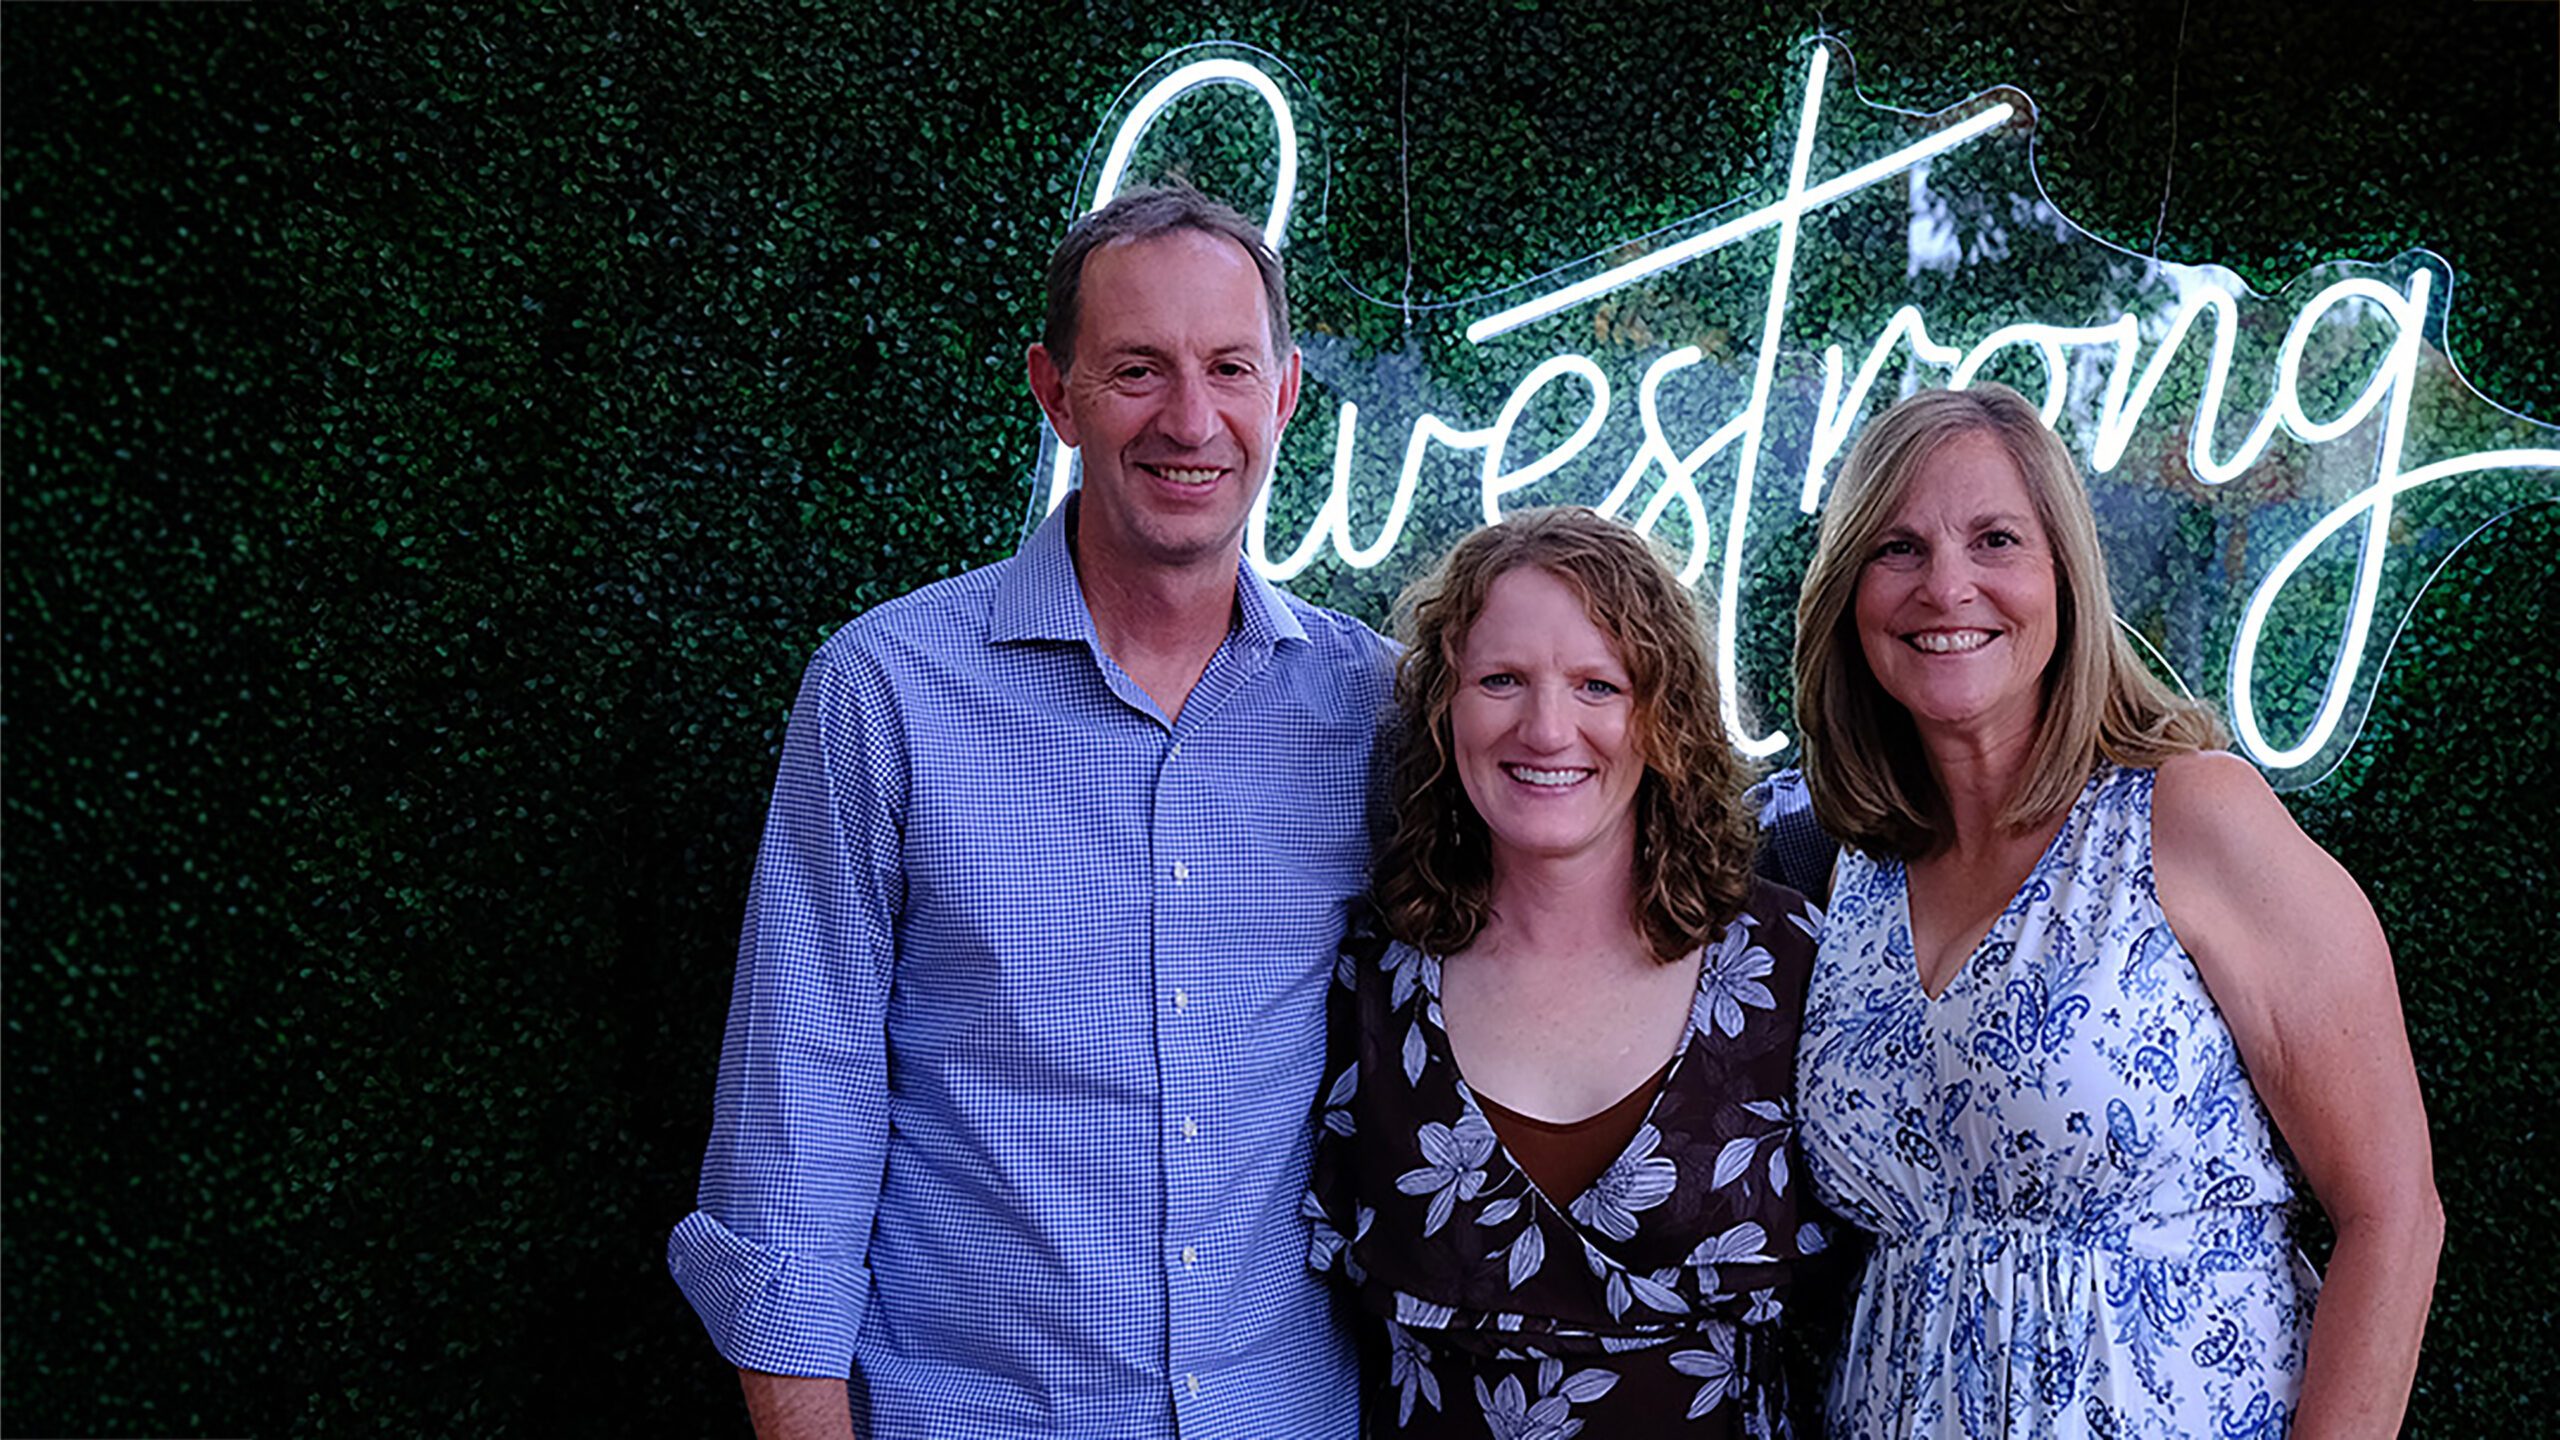 A man and two women standing in front of Livestrong neon sign and greenery